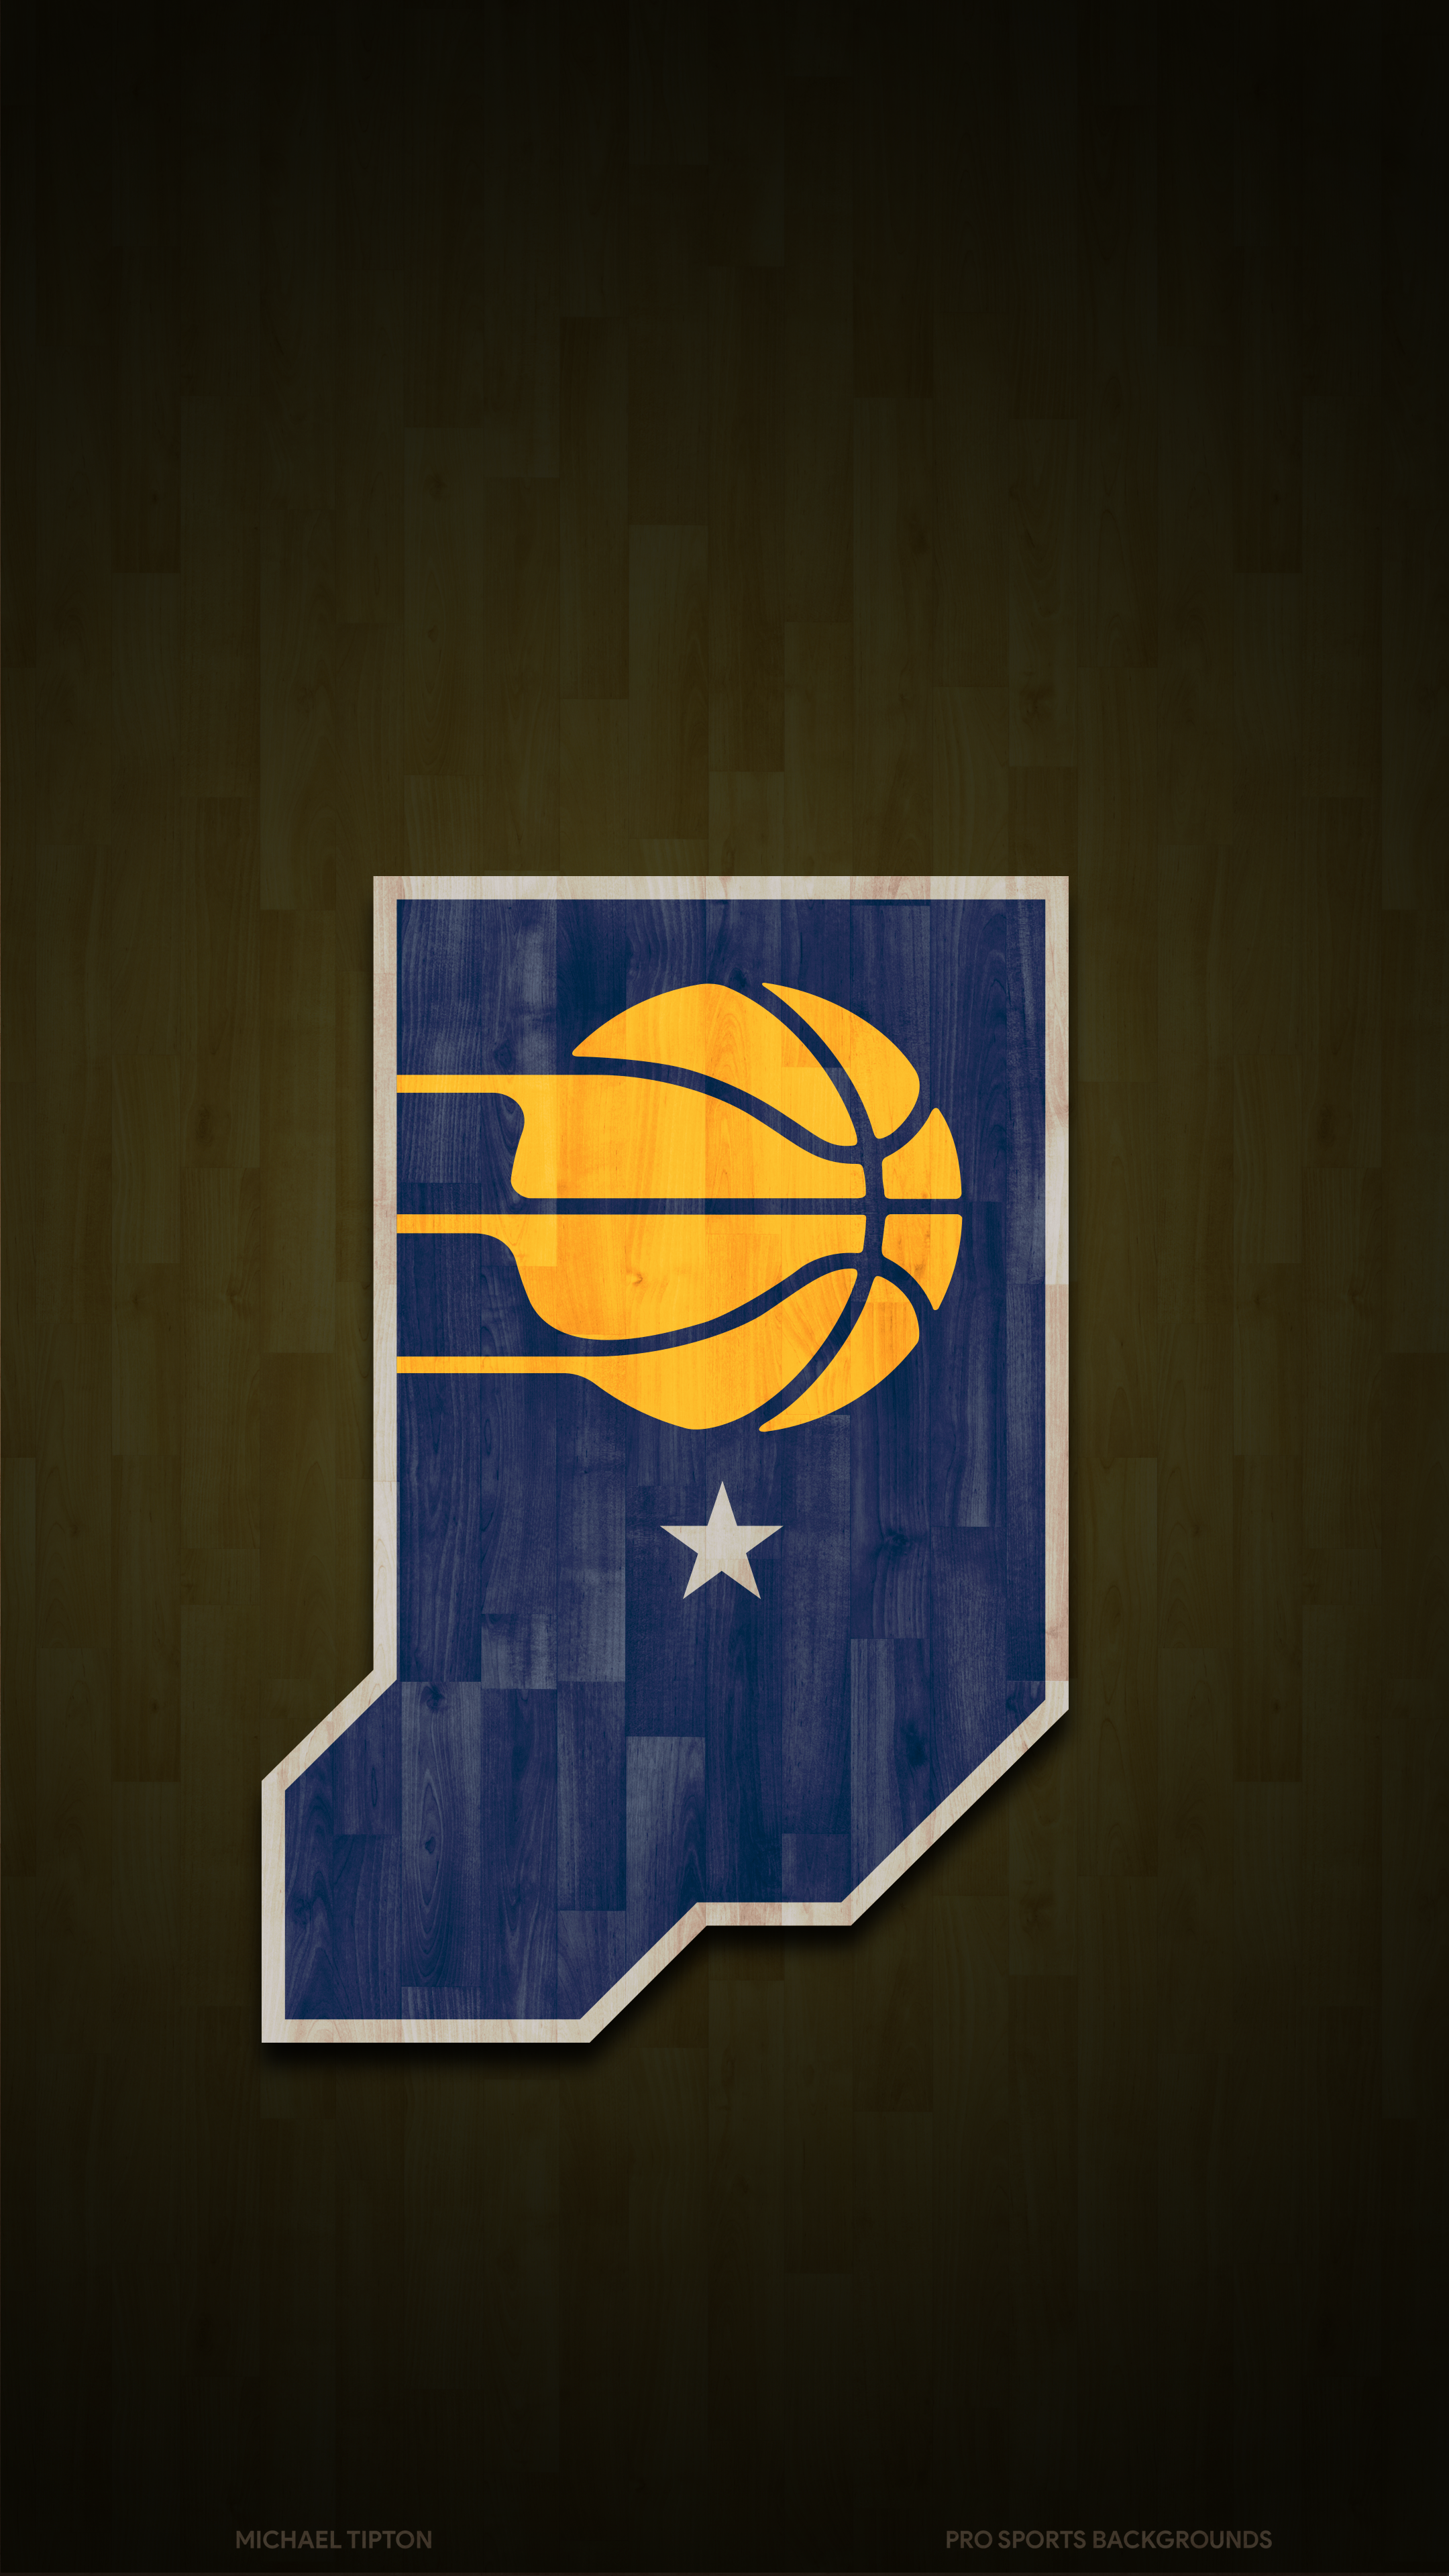 Indiana Pacers Wallpaper. Indiana pacers, Indiana pacers